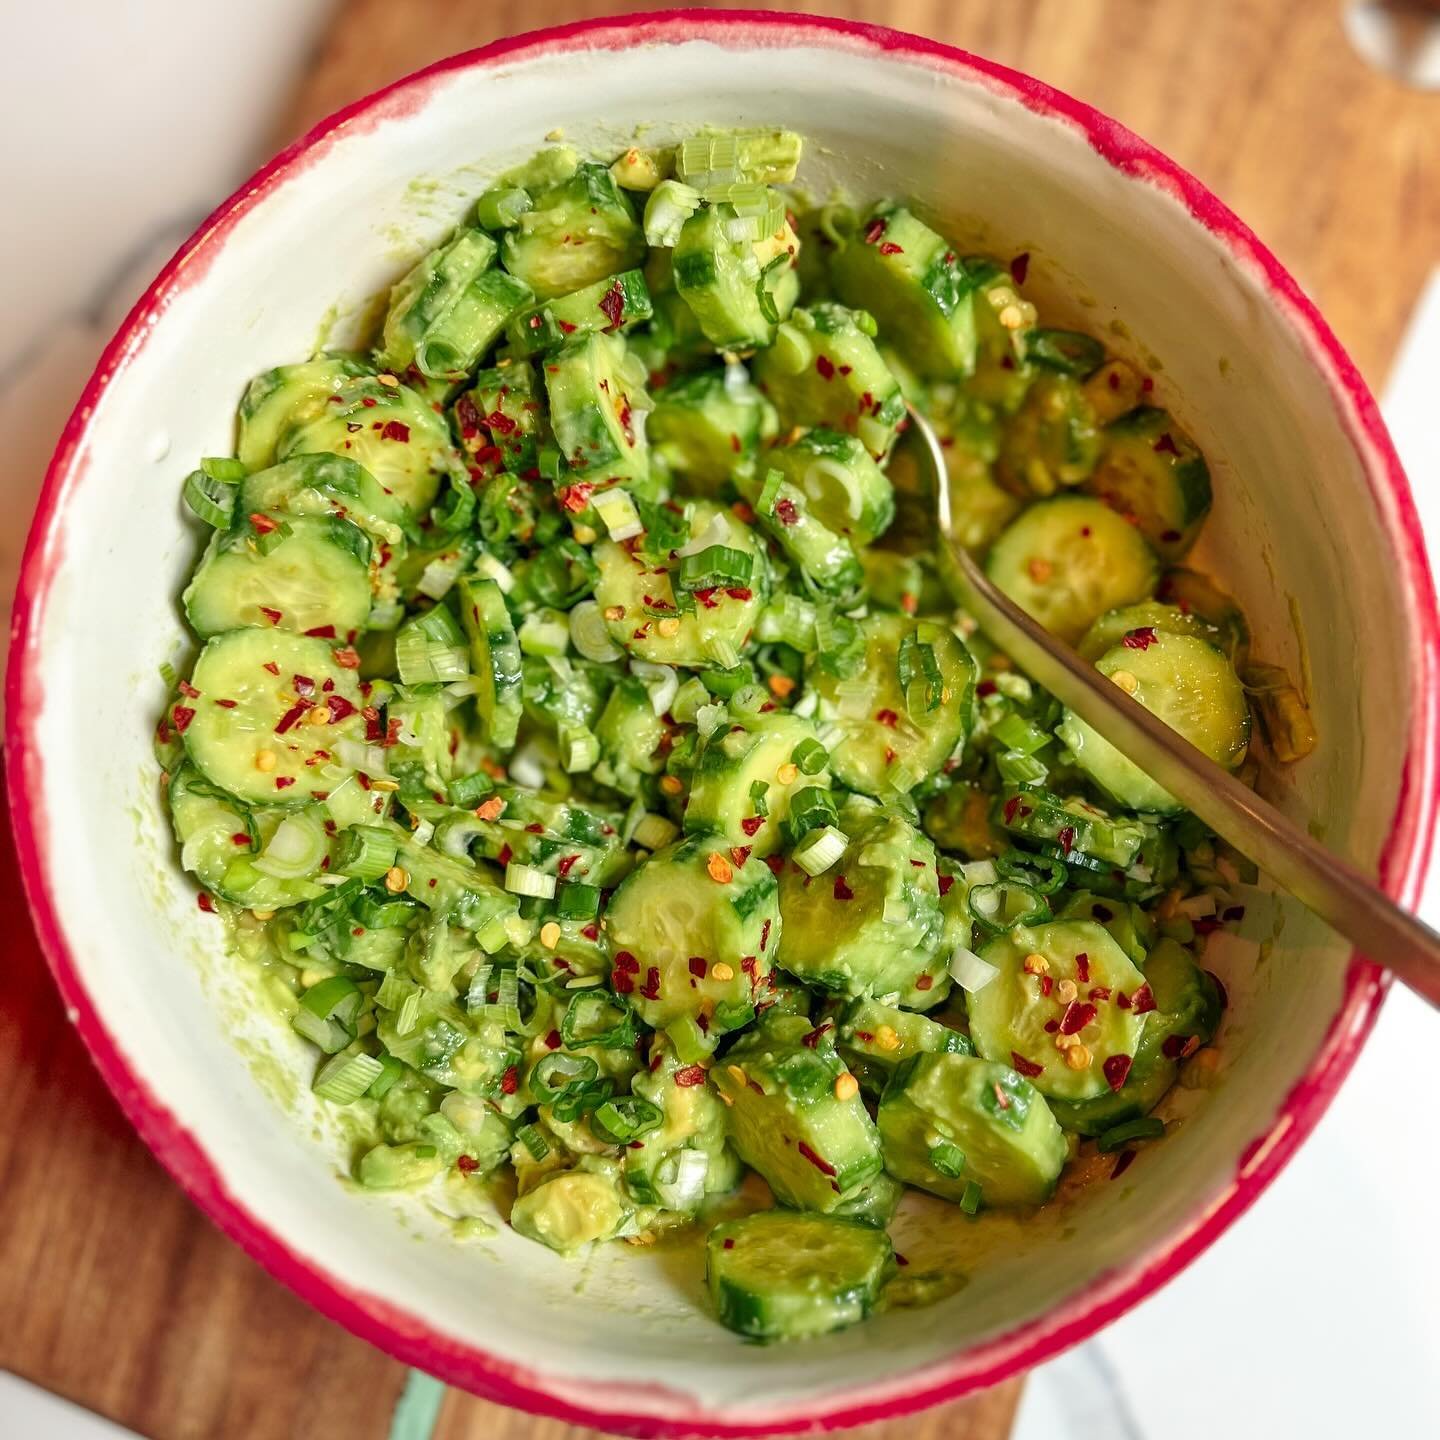 Cucumber Avocado Salad 

This is the season where all our glorious greens begin to shine &amp; it brings me pure joy. Being a very serious fan of @nytcooking I often use my OCD like behaviors to read &amp; look at ALL recipes then I file them neatly 